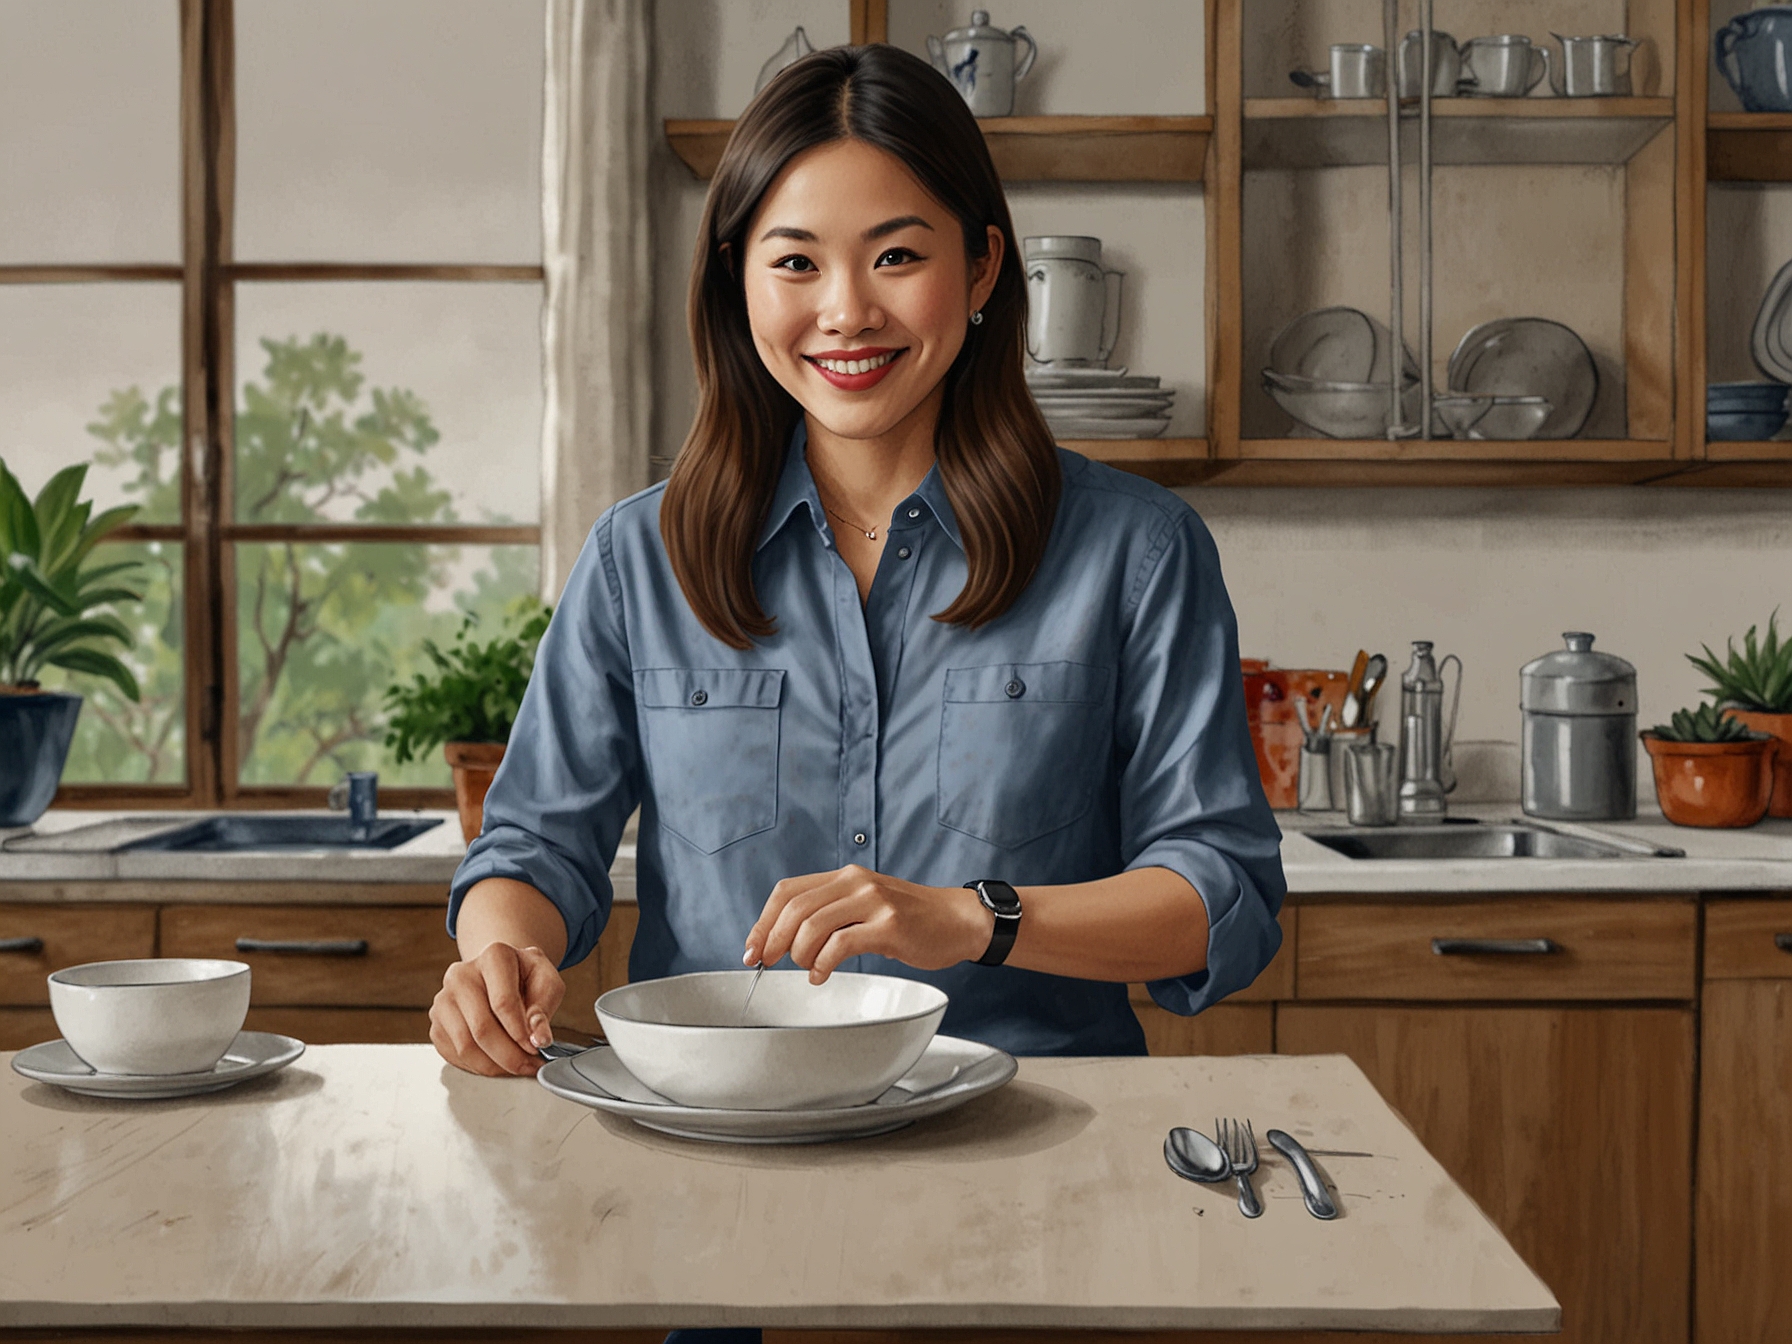 Sara Jane Ho demonstrating the correct way to set a table, showcasing her modern approach to etiquette as part of personal wellness on Netflix's Mind Your Manners.